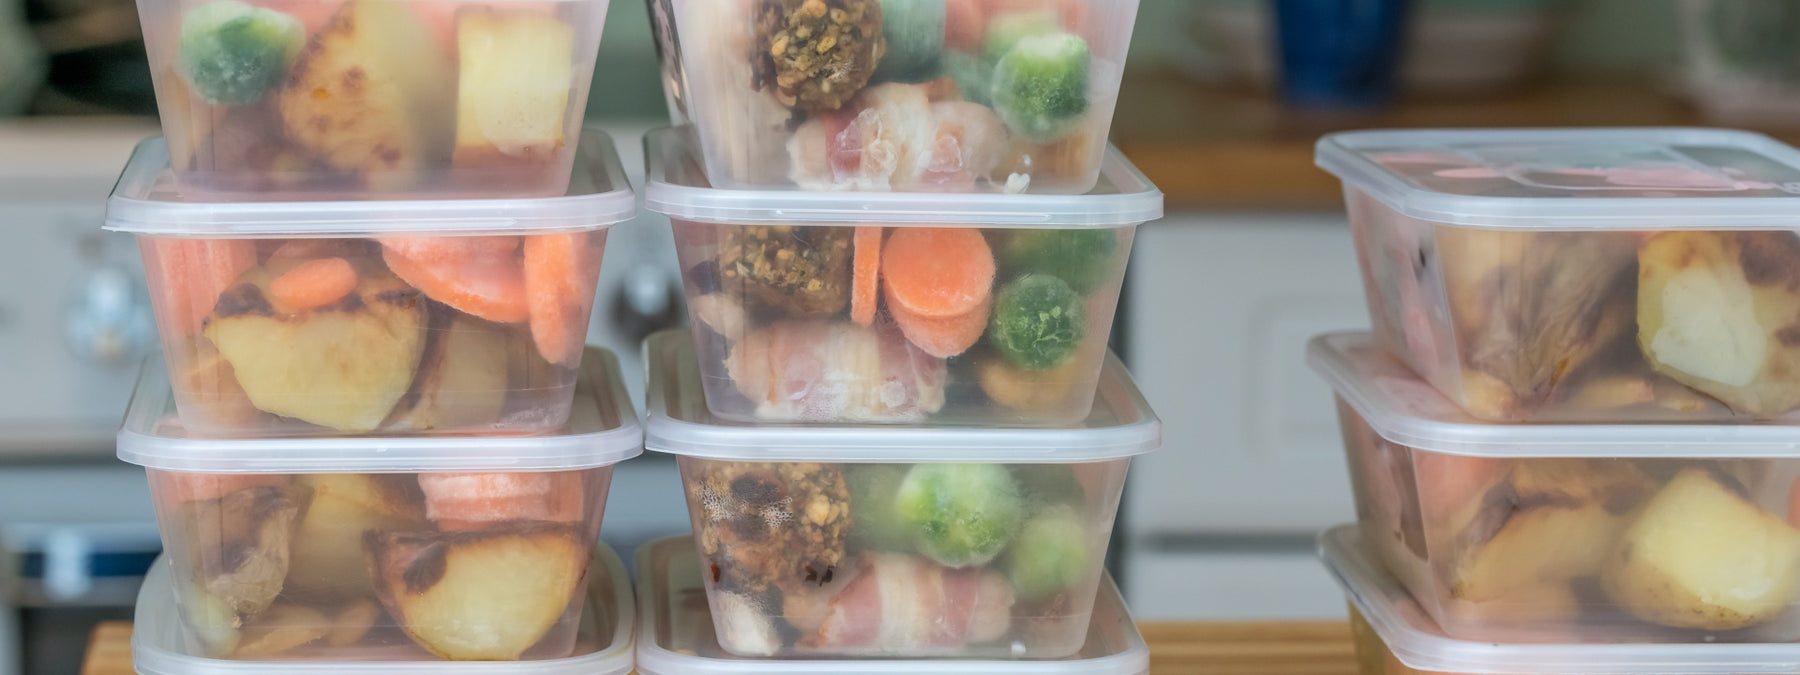 5 Important Reasons You Should Meal Prep